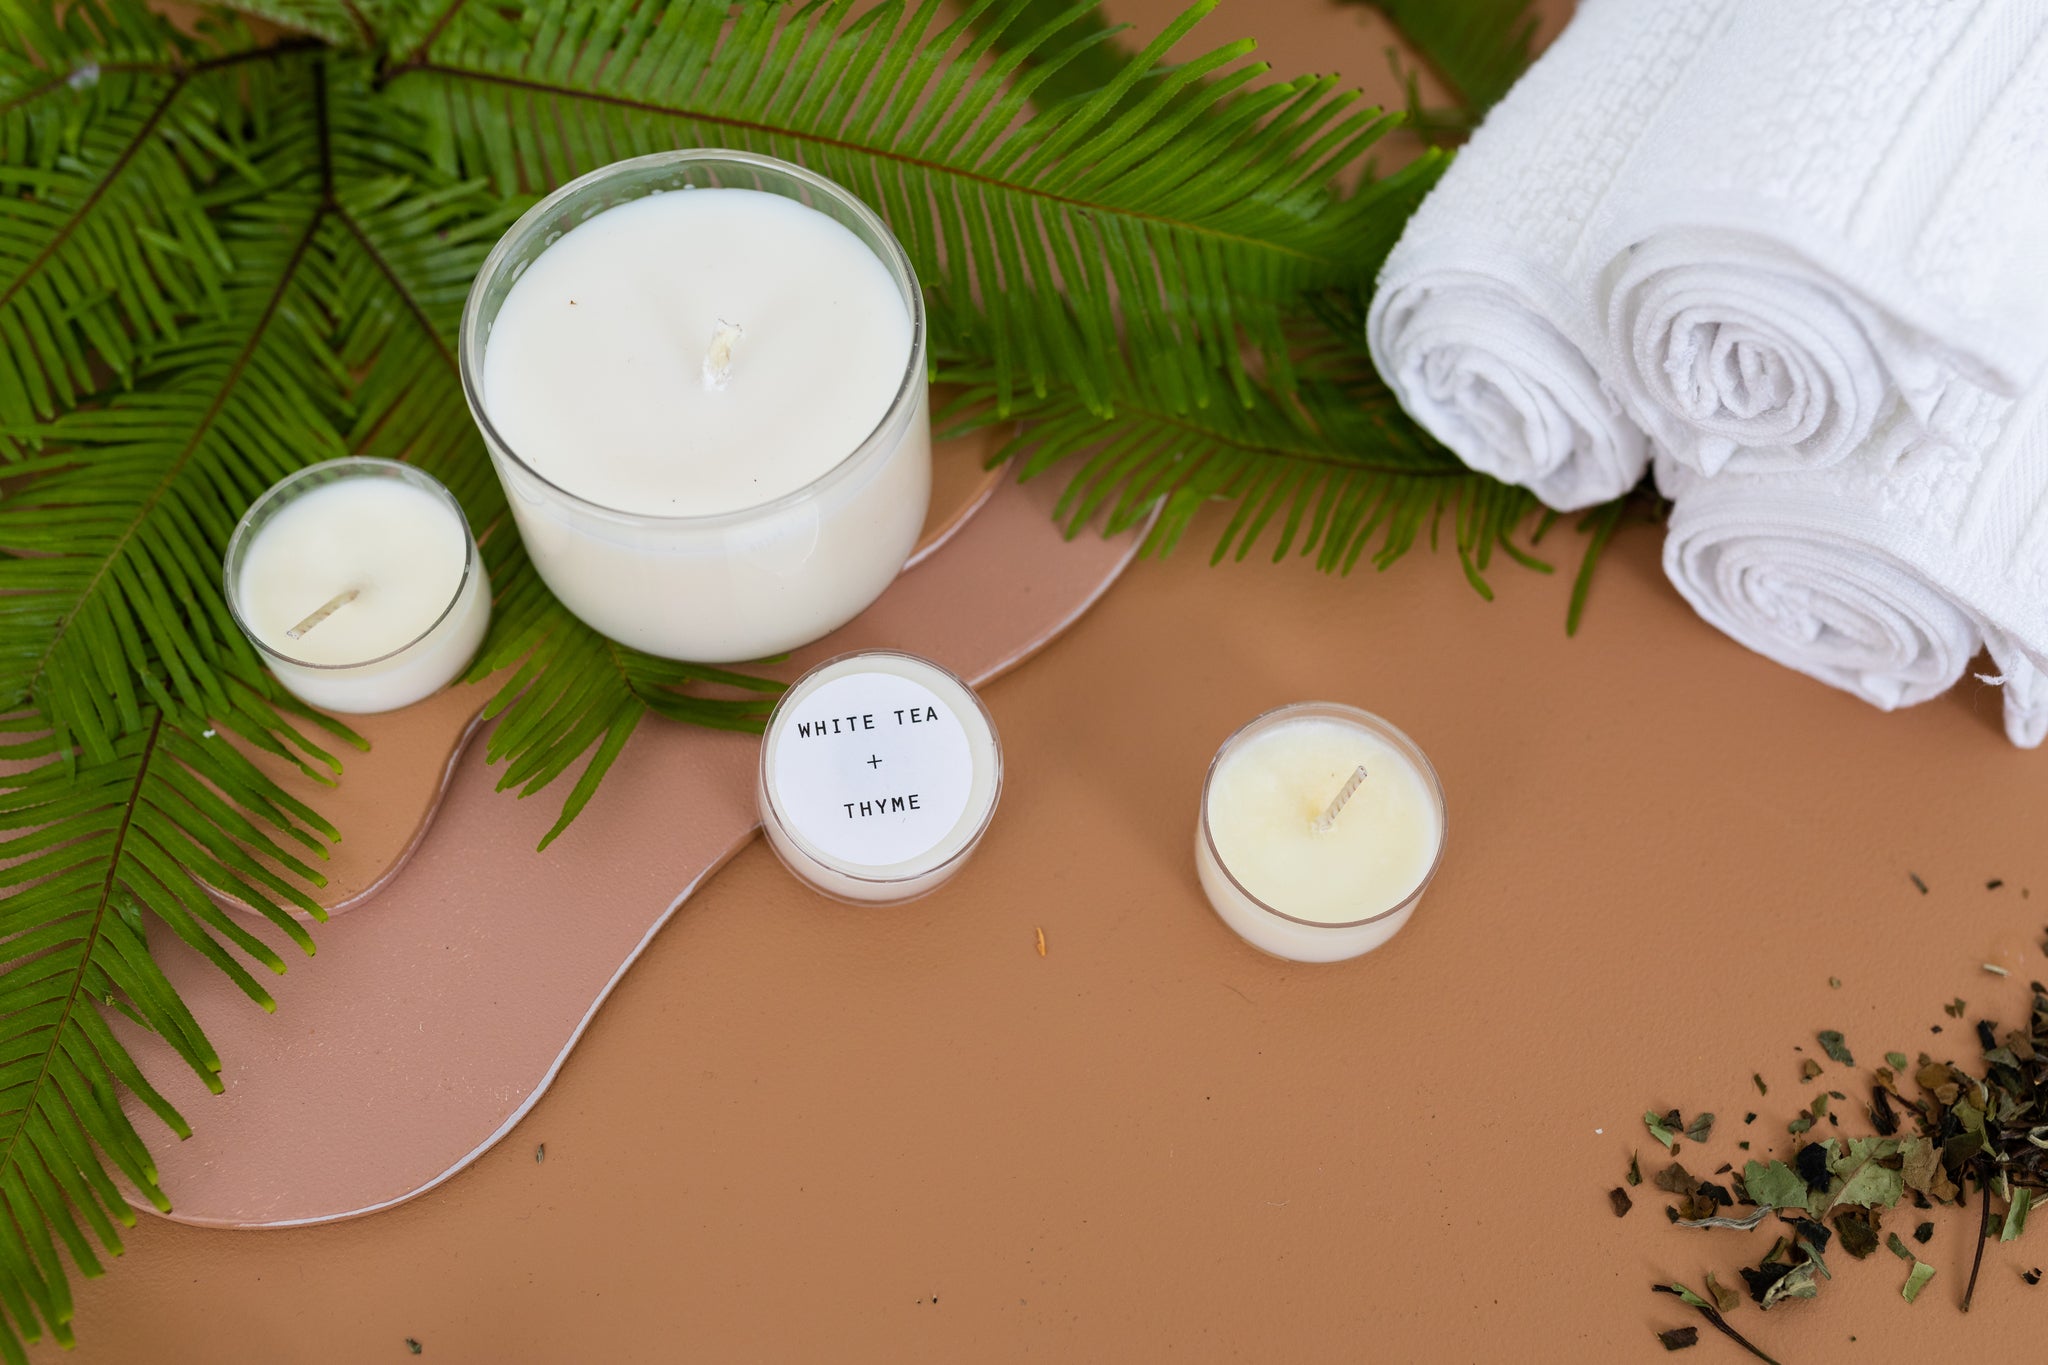 Let us start the process of creating your own branded candle by kicking it off with the Standard Wax Scent Kit. If you don’t know where to start when designing a customized private label candle, reach out to Standard Wax to explore a library of our very best smelling candle fragrances. 